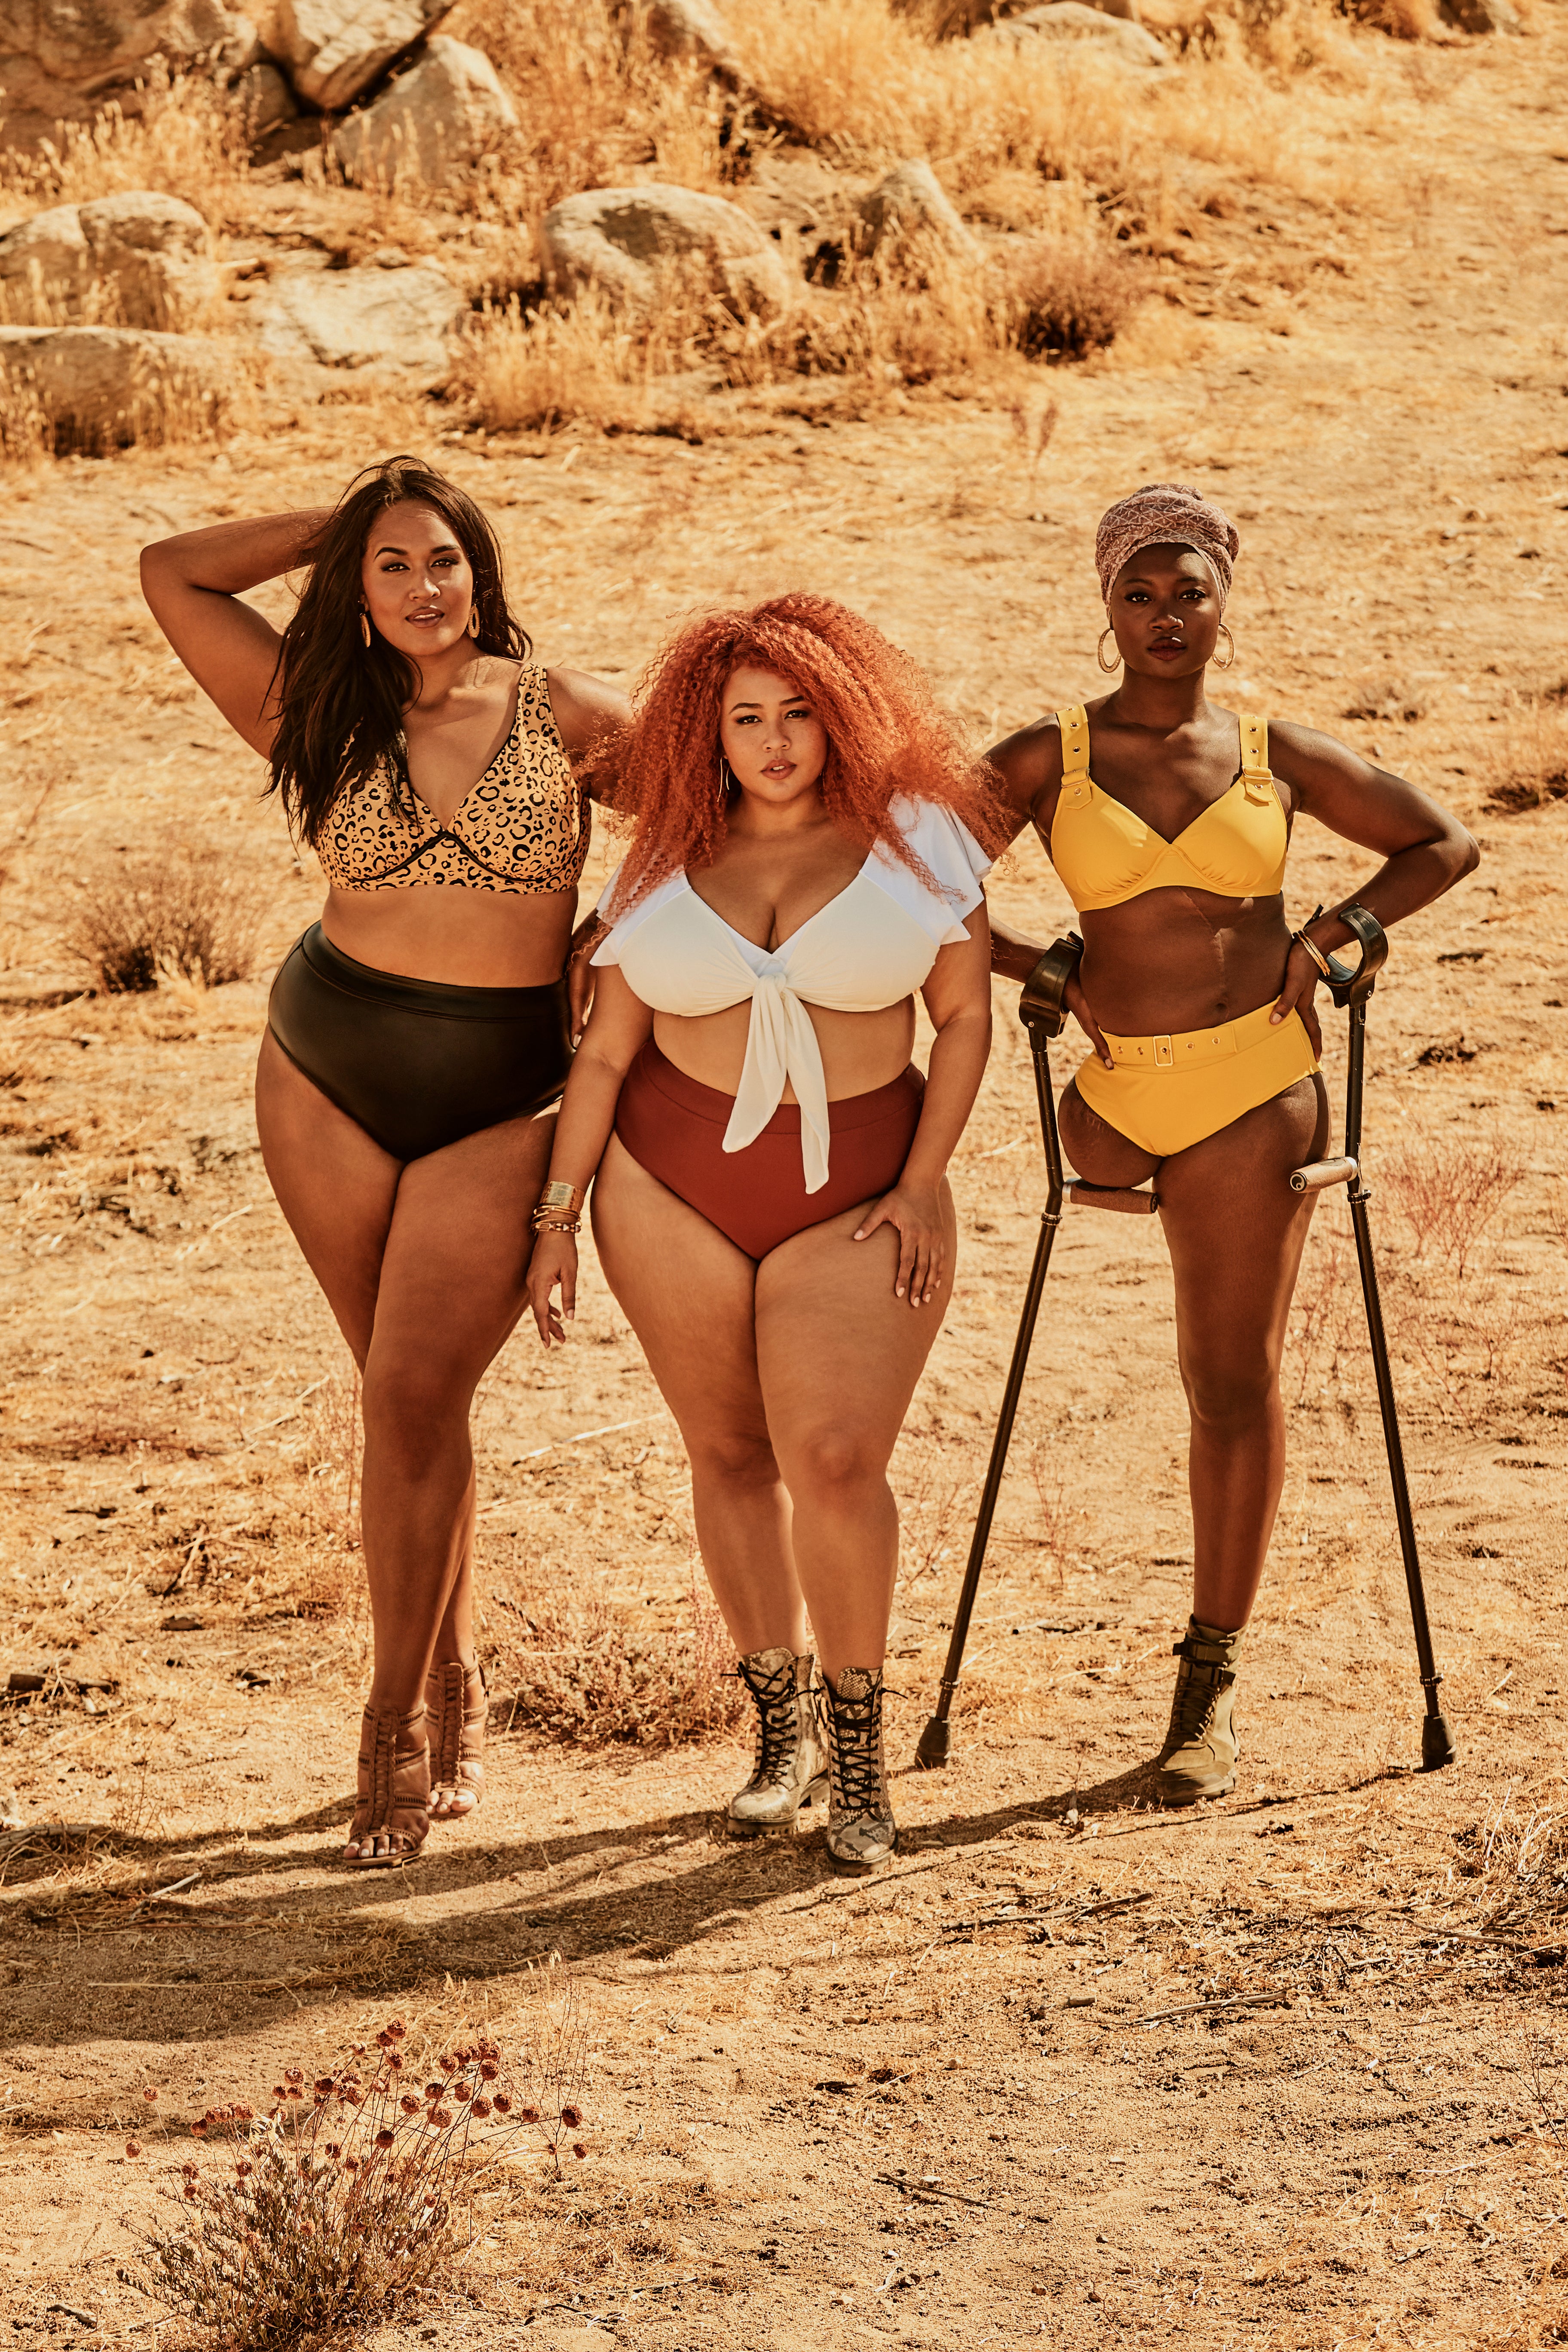 GabiFresh is the Queen of the Bikini In Her New SwimsuitsForAll Campaign